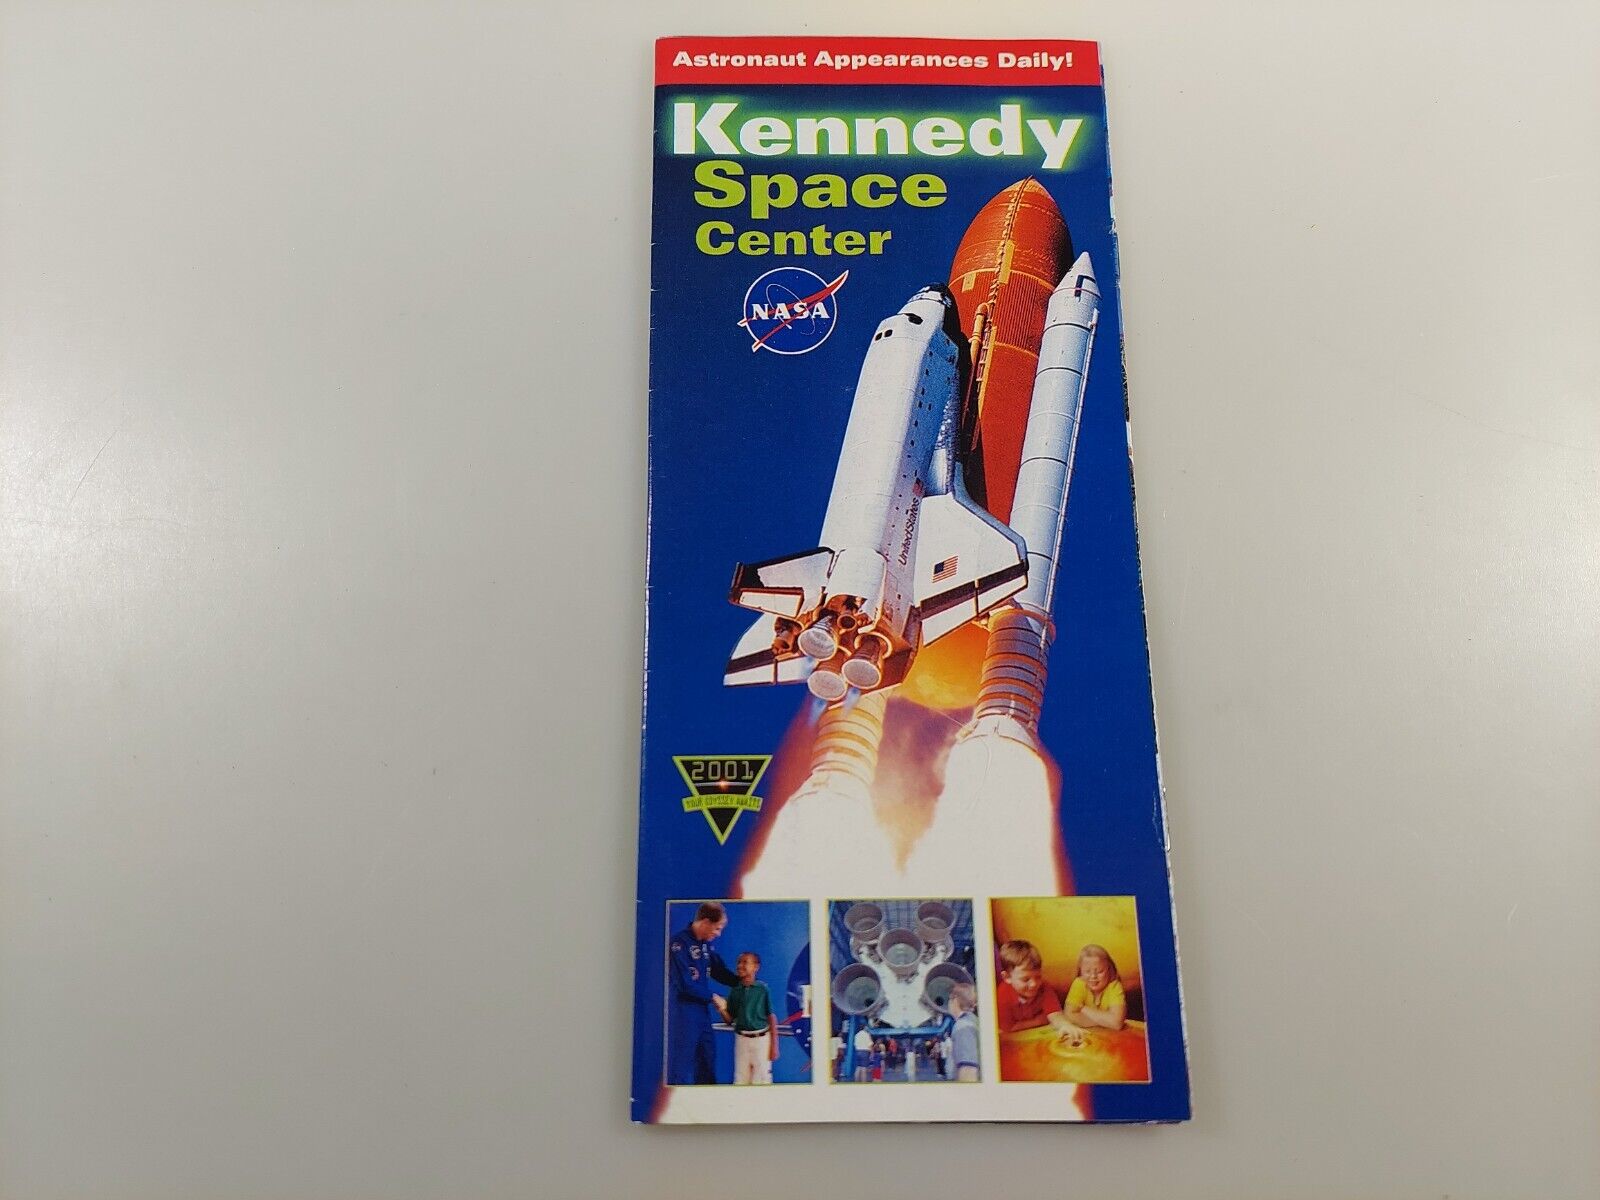 Kennedy Space Center and the Kennedy Space Center Complex Brochures